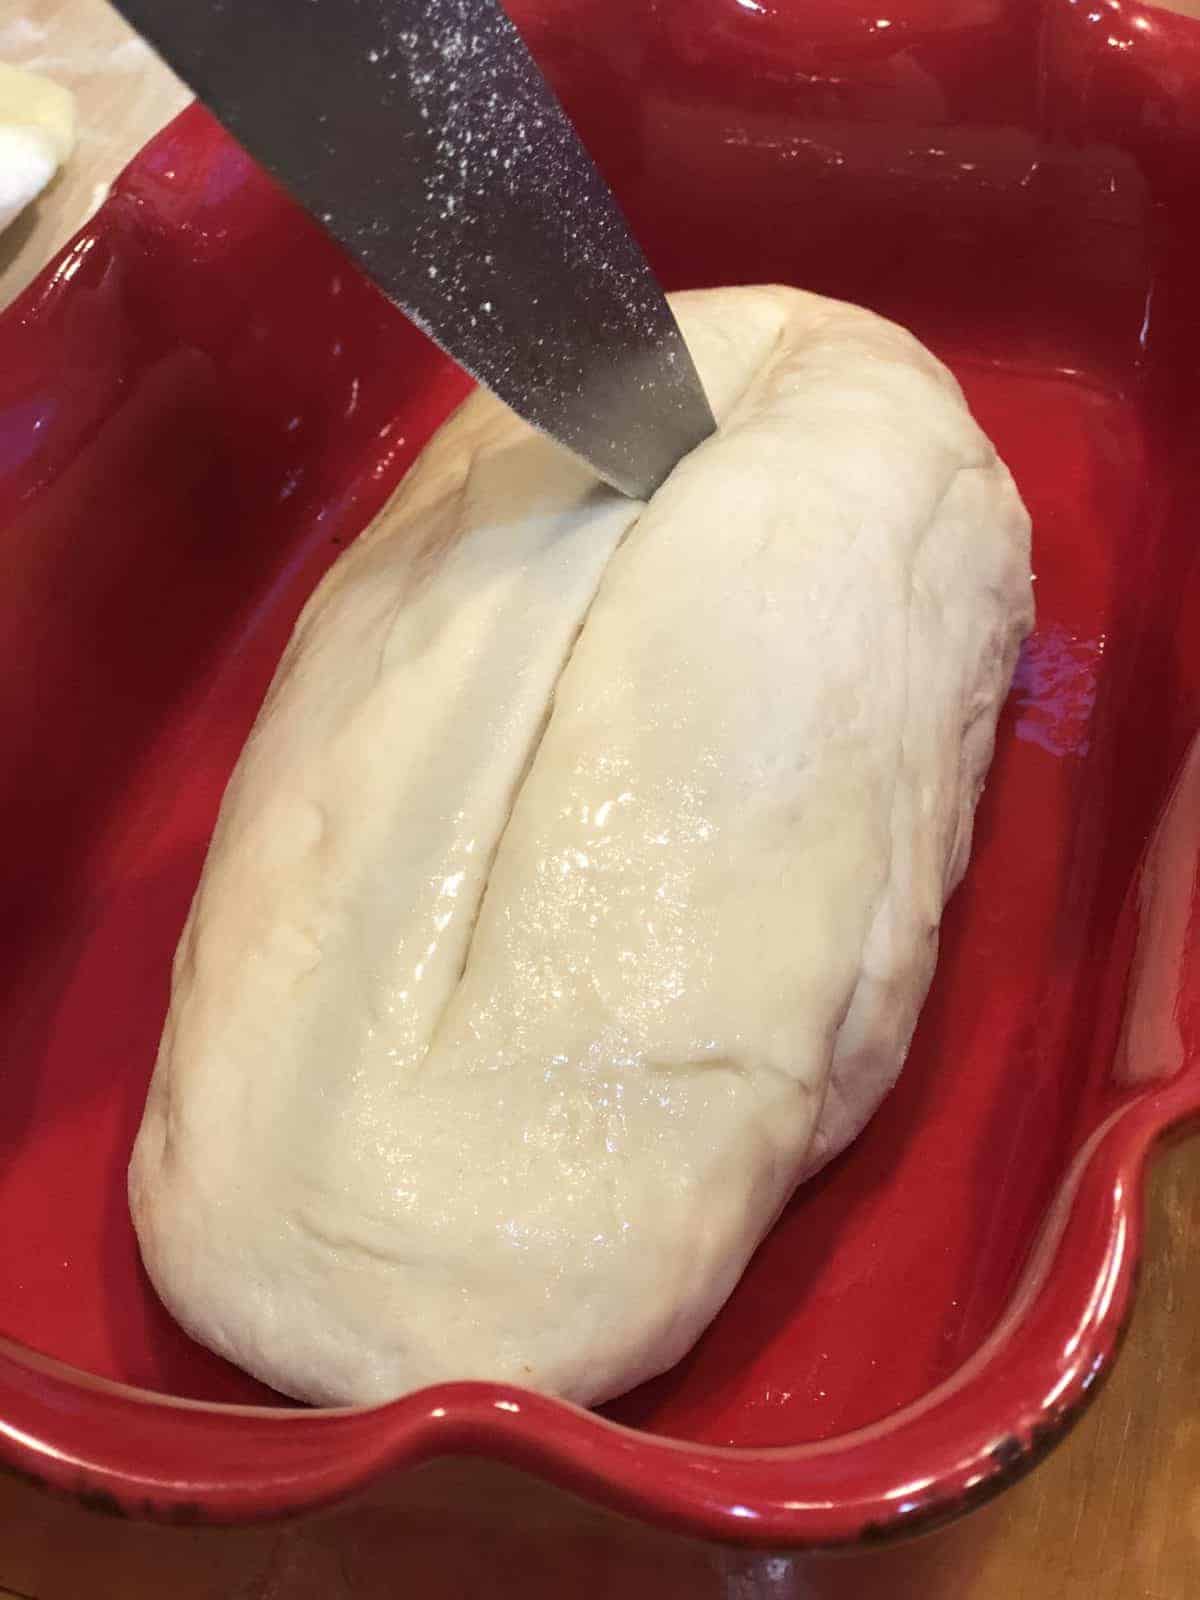 Preparing Homemade Dough for Baking by slicing the dough down the middle with a stainless steel knife